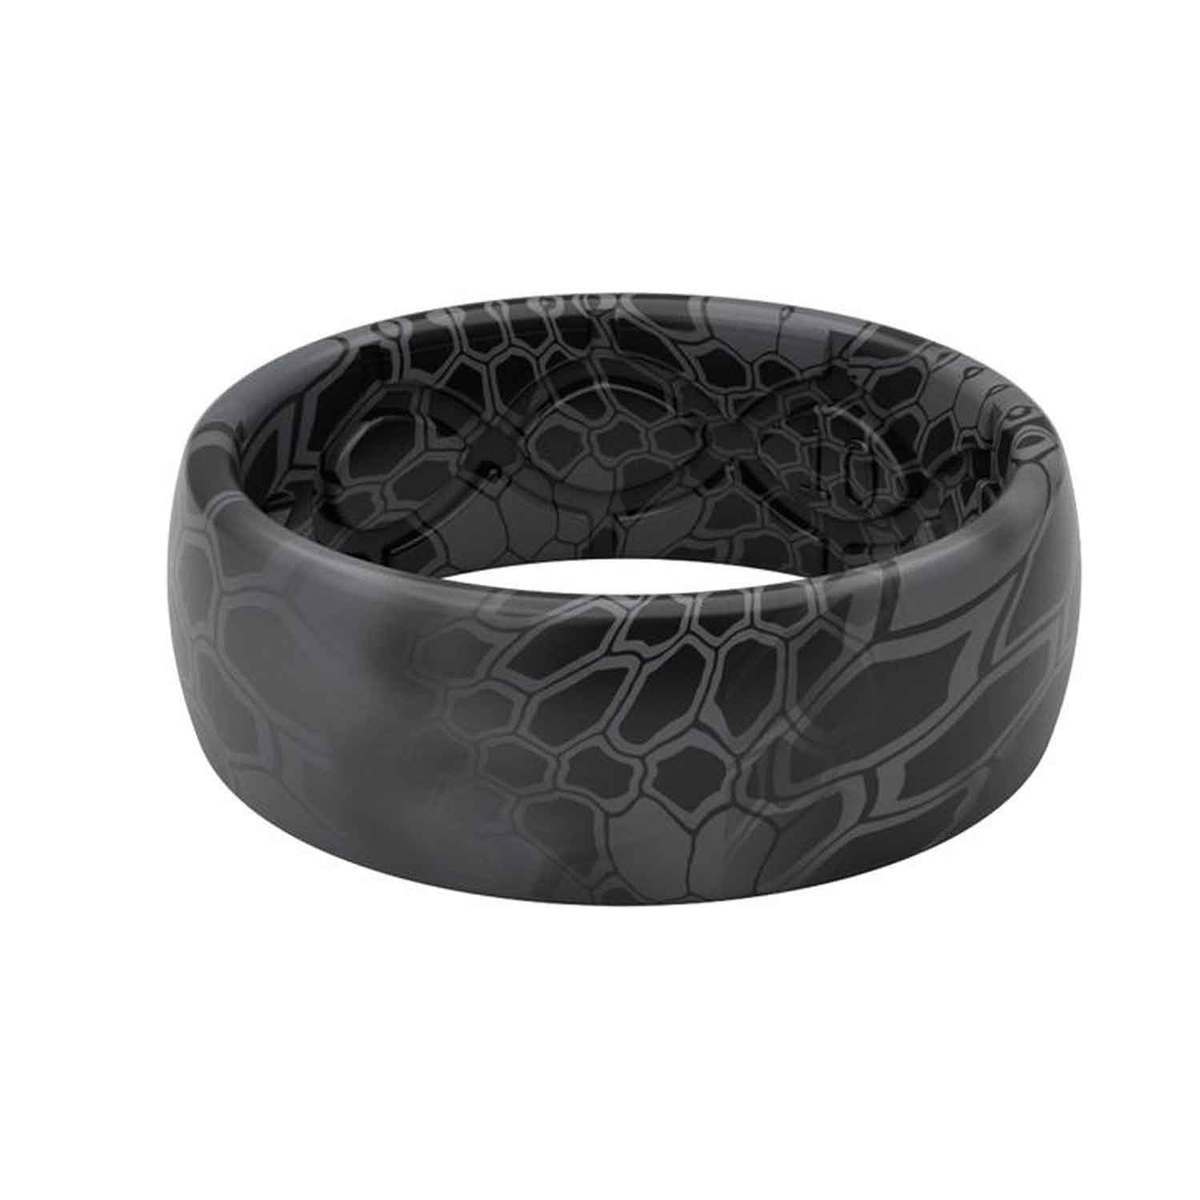 Silicone Ring for Men - Black - Lifetime Warranty! | Rinfit Camo Gray / Size 7